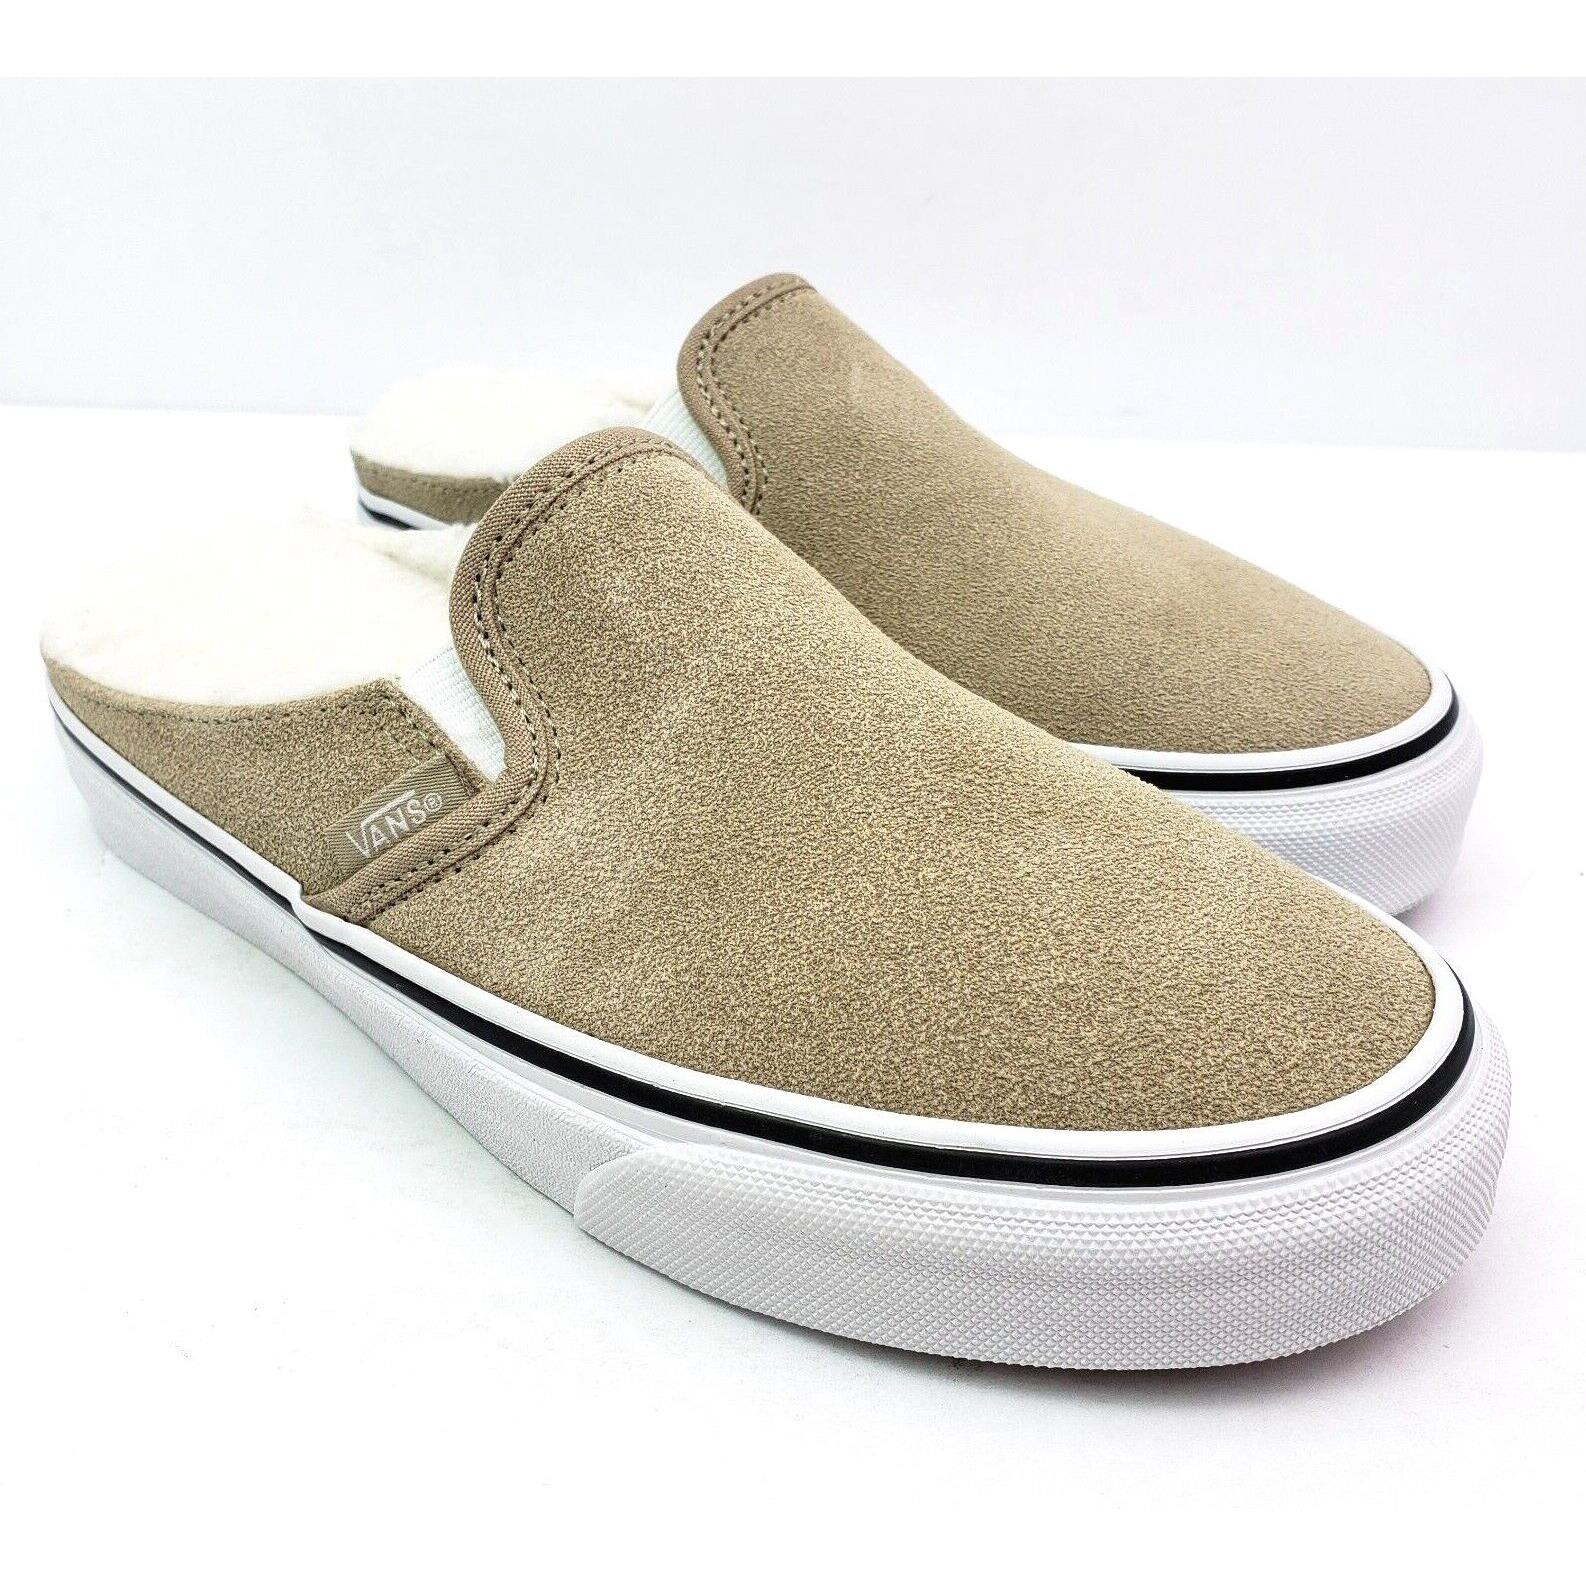 Vans Asher Mule Womens Size 6 Suede Sherpa Brown Slip On Shoes VN0000SCNWH